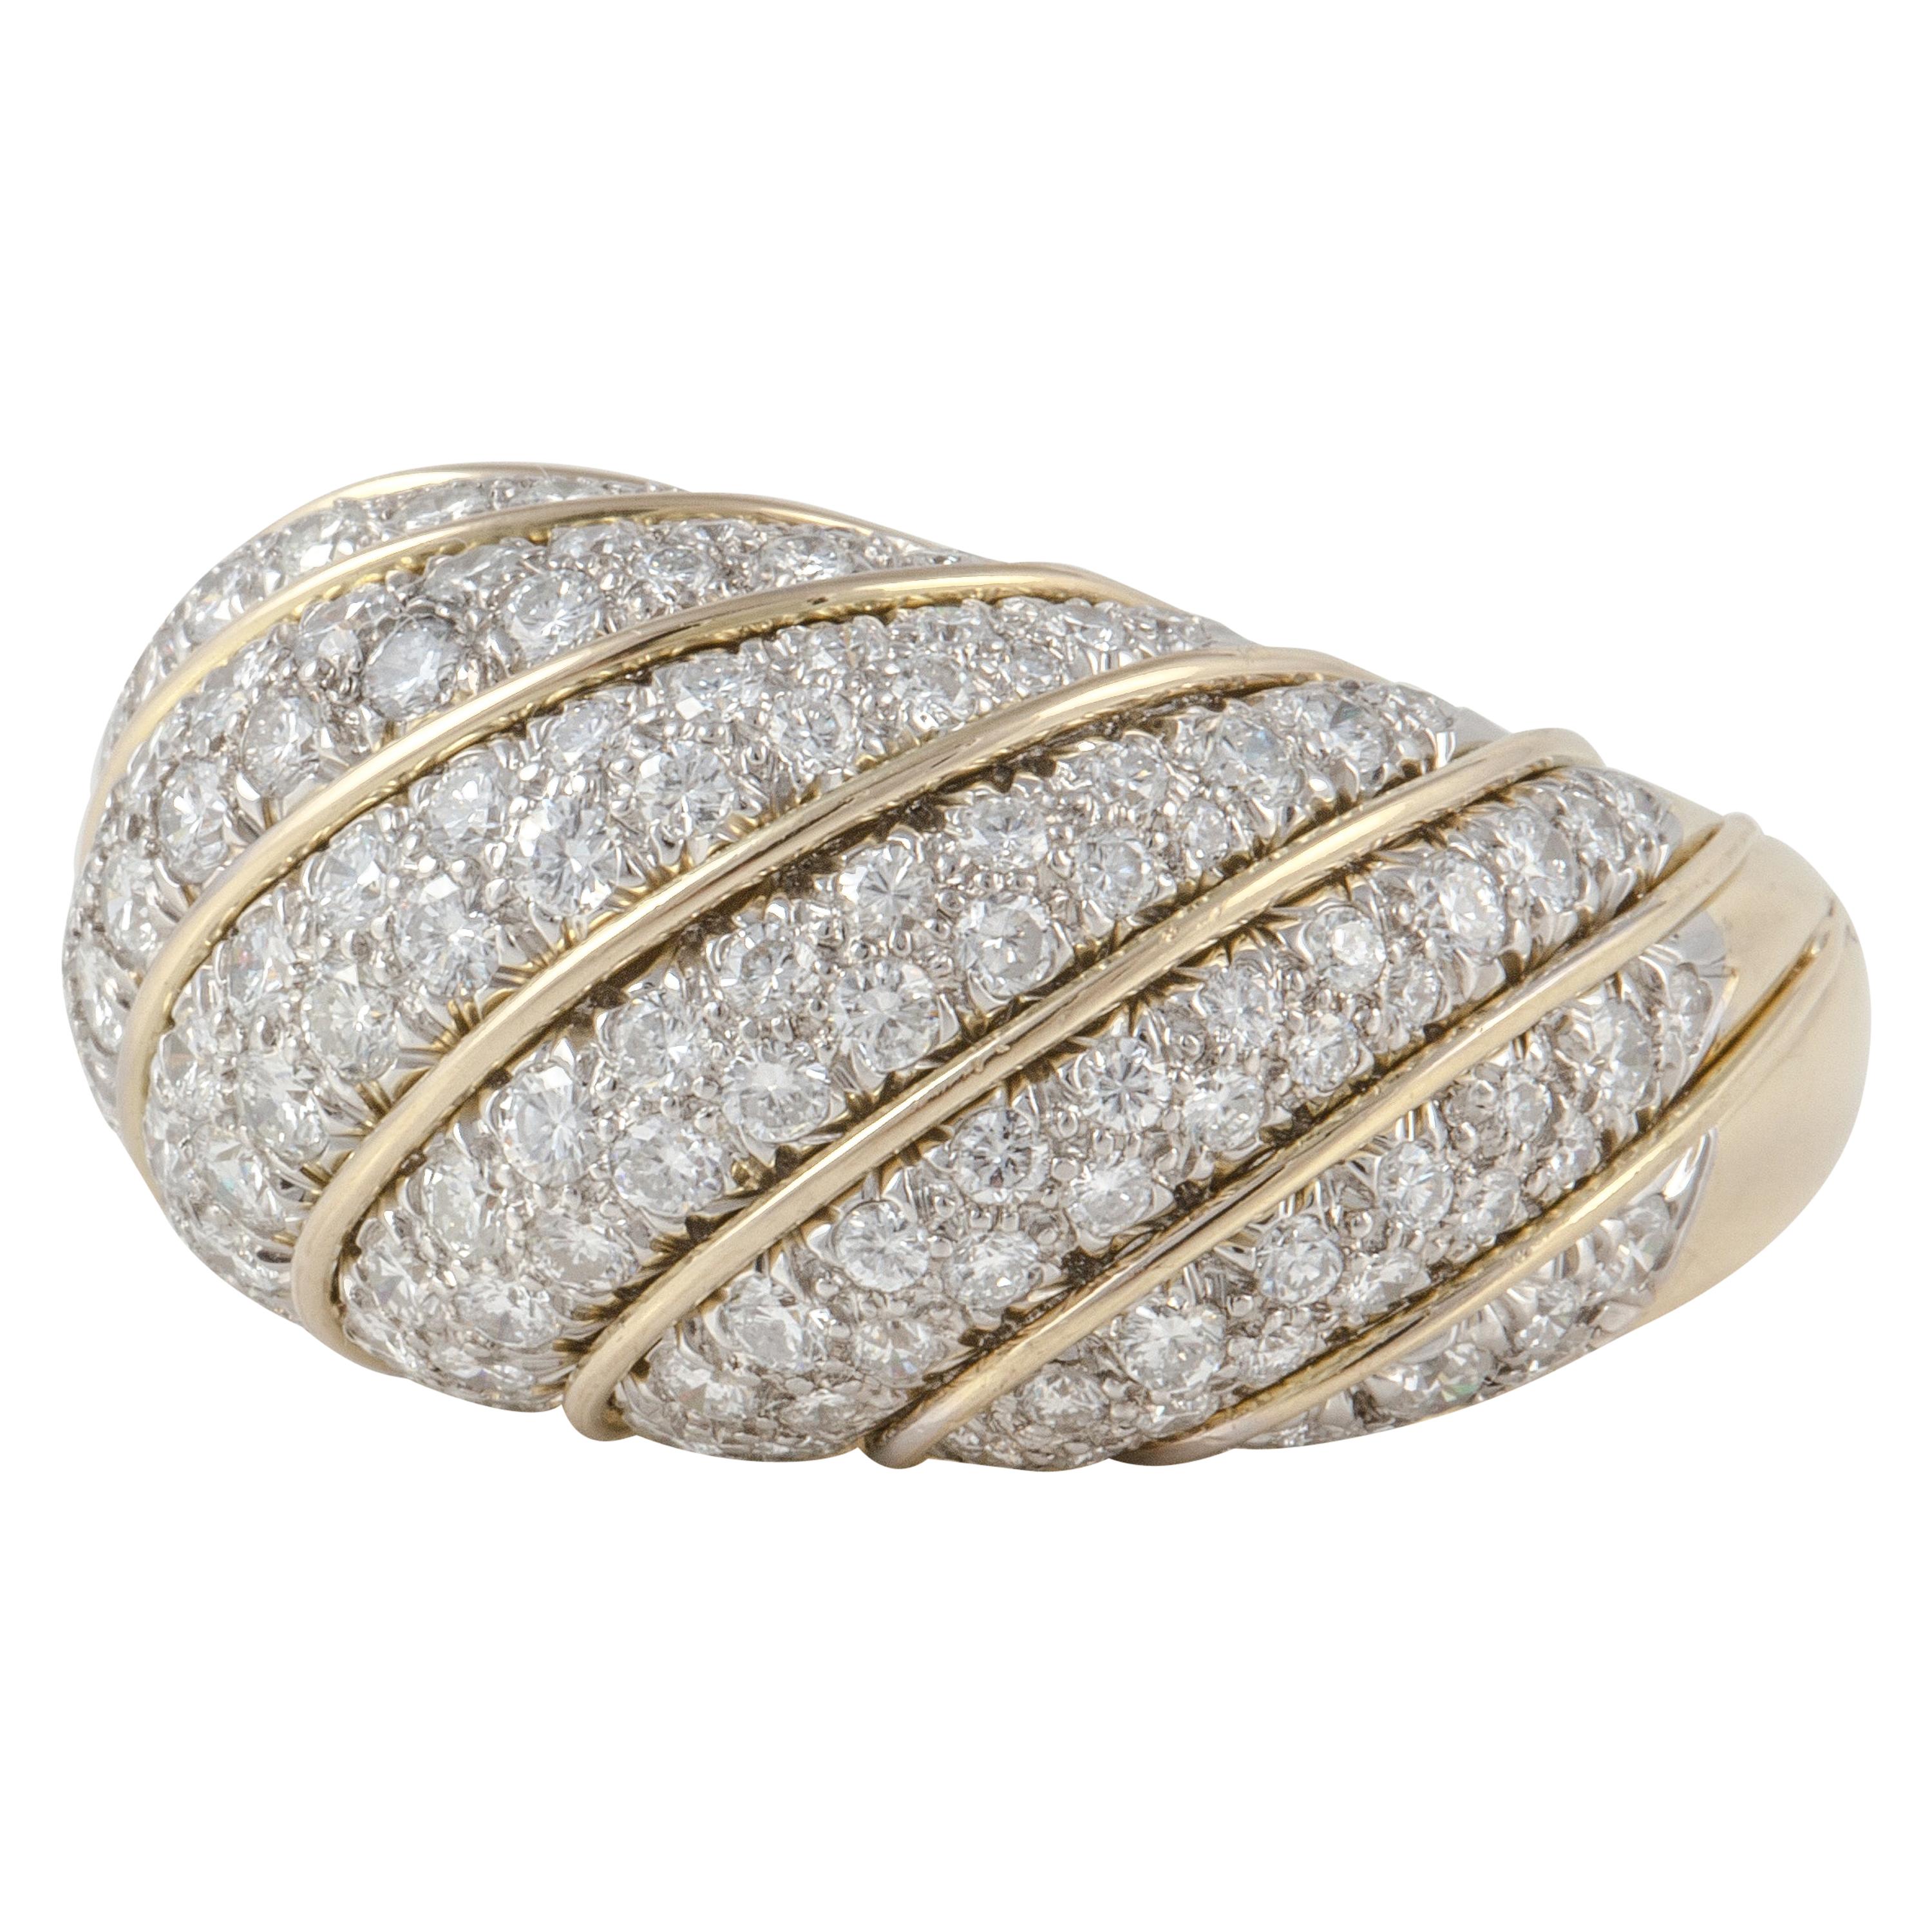 Pavé Diamond Dome Ring in 18K Gold and Platinum